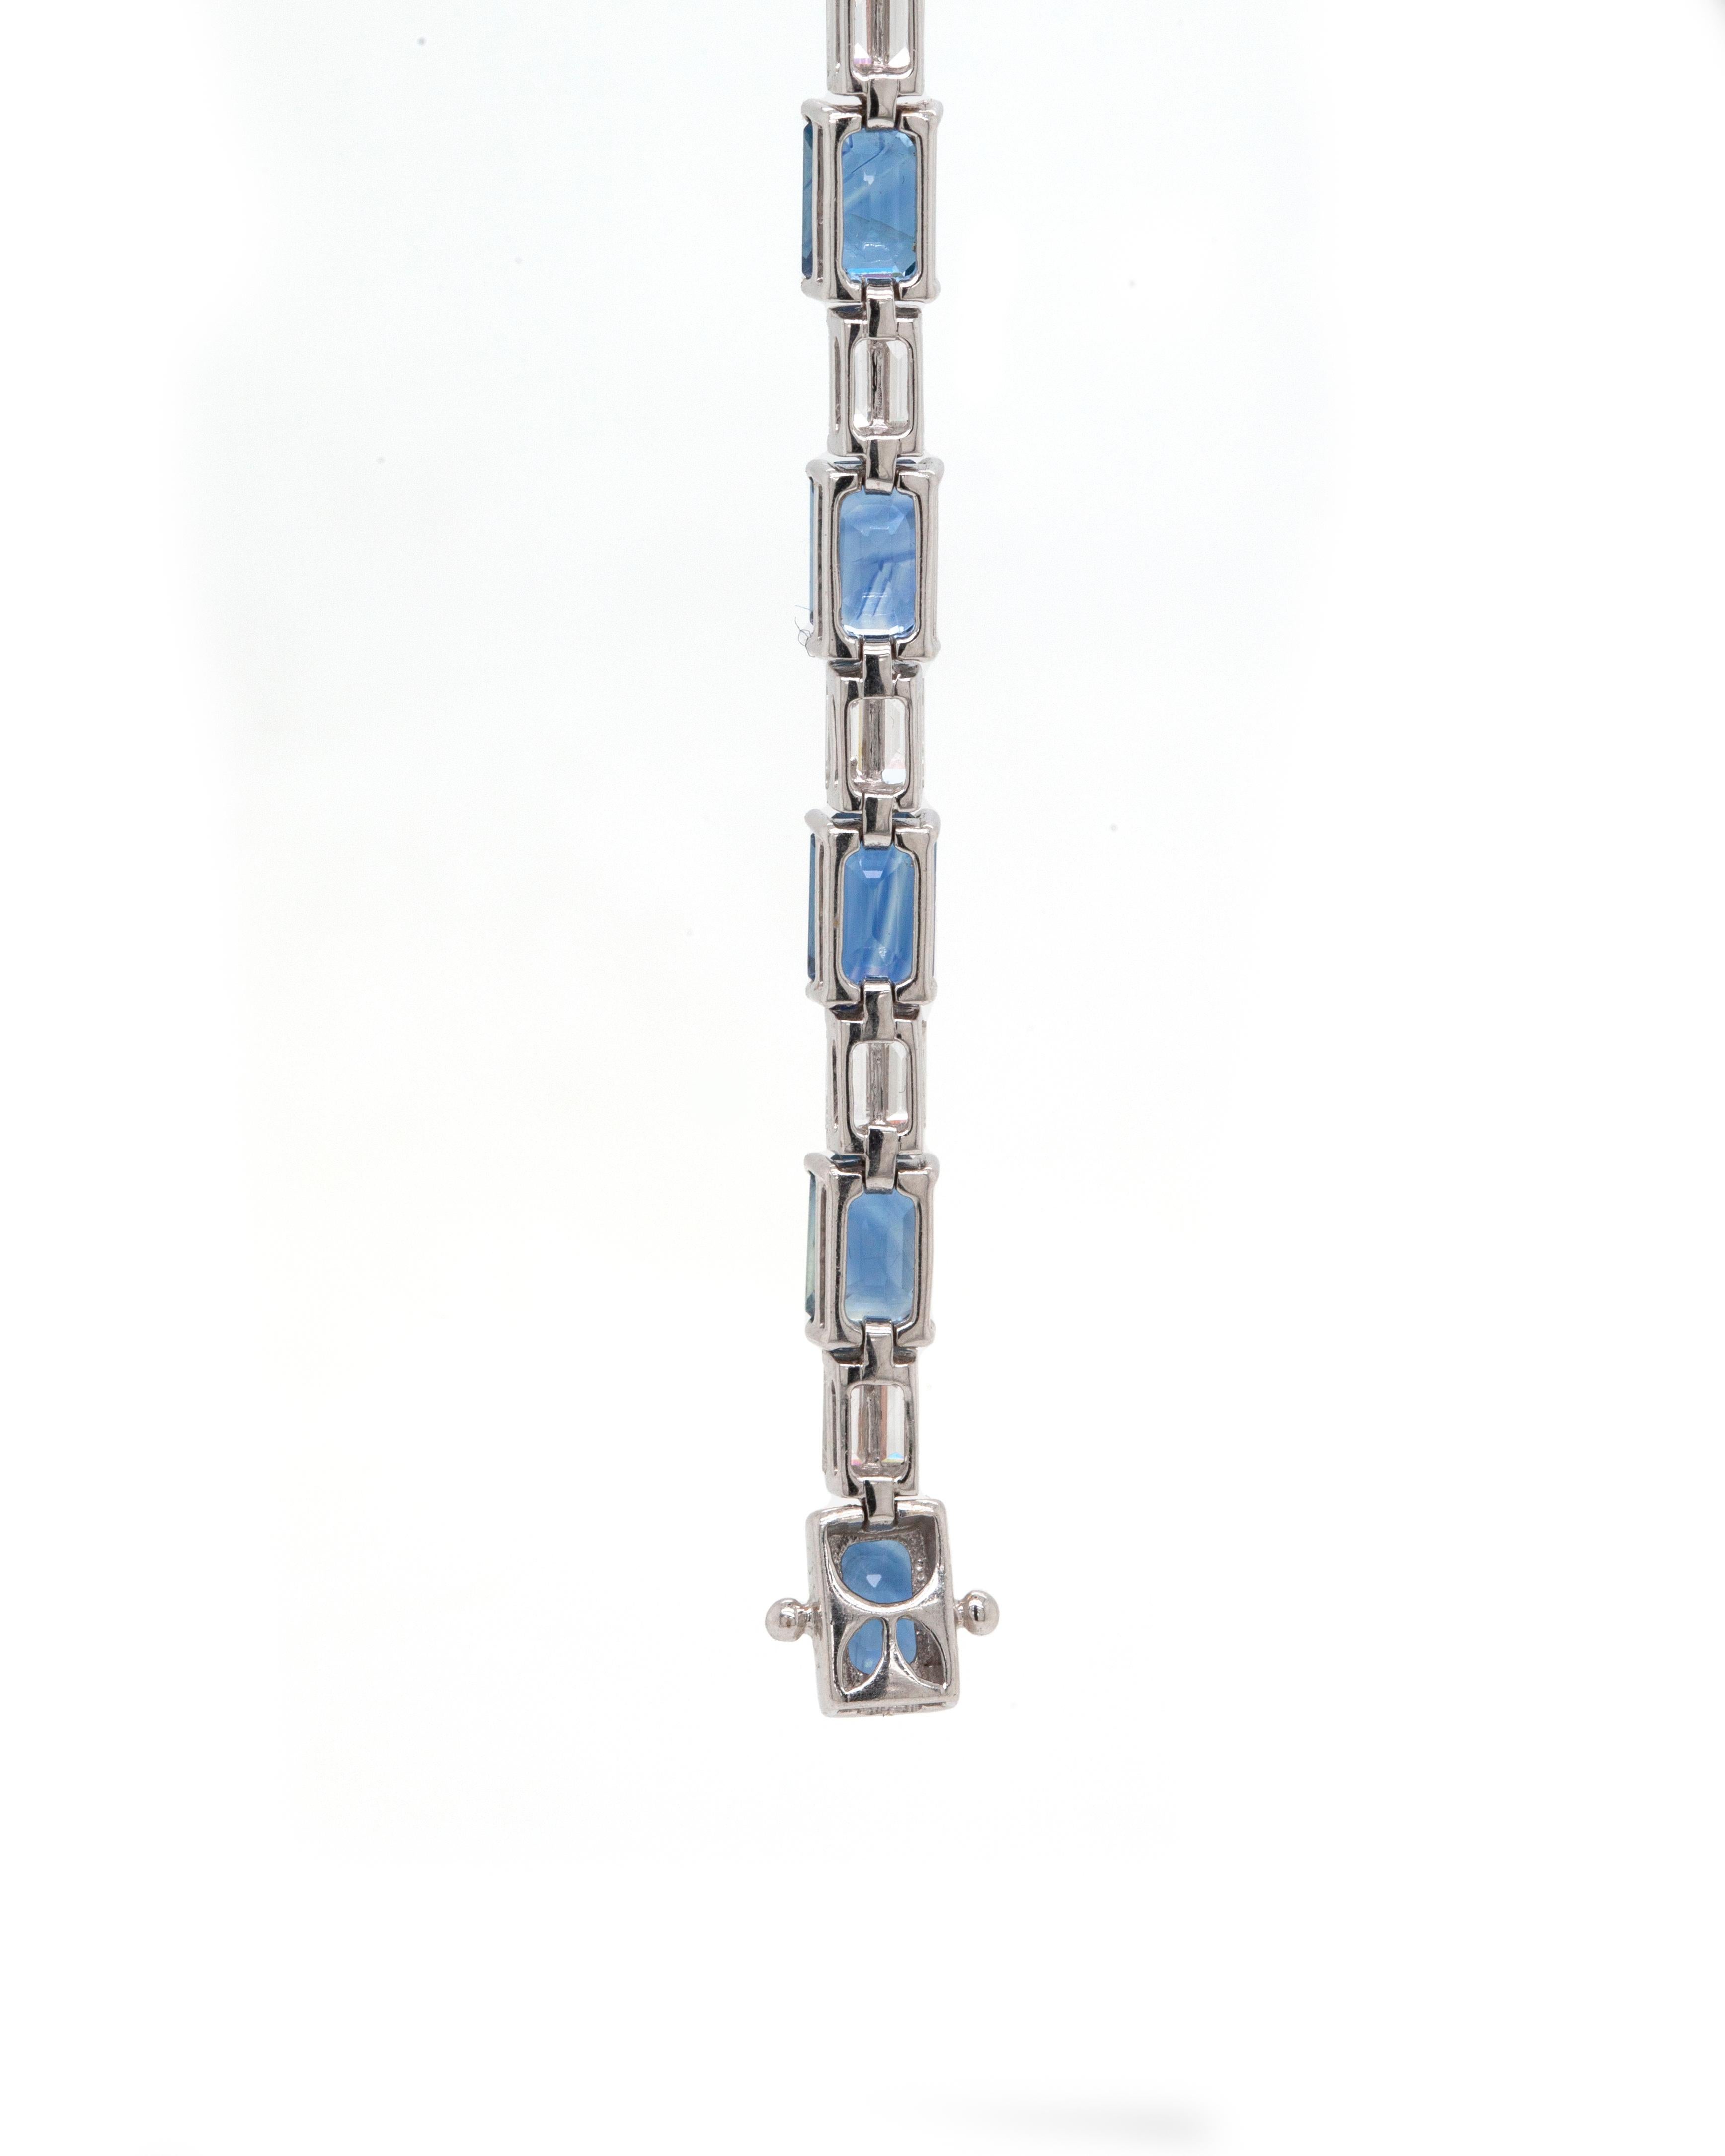 Sleek and elegant, this wonderful 18 carat white gold bracelet features 15 emerald cut blue sapphires all mounted in four claw, open back settings, totalling to an approximate weight of 13.00ct. Alternating with the rich sapphires and creating a